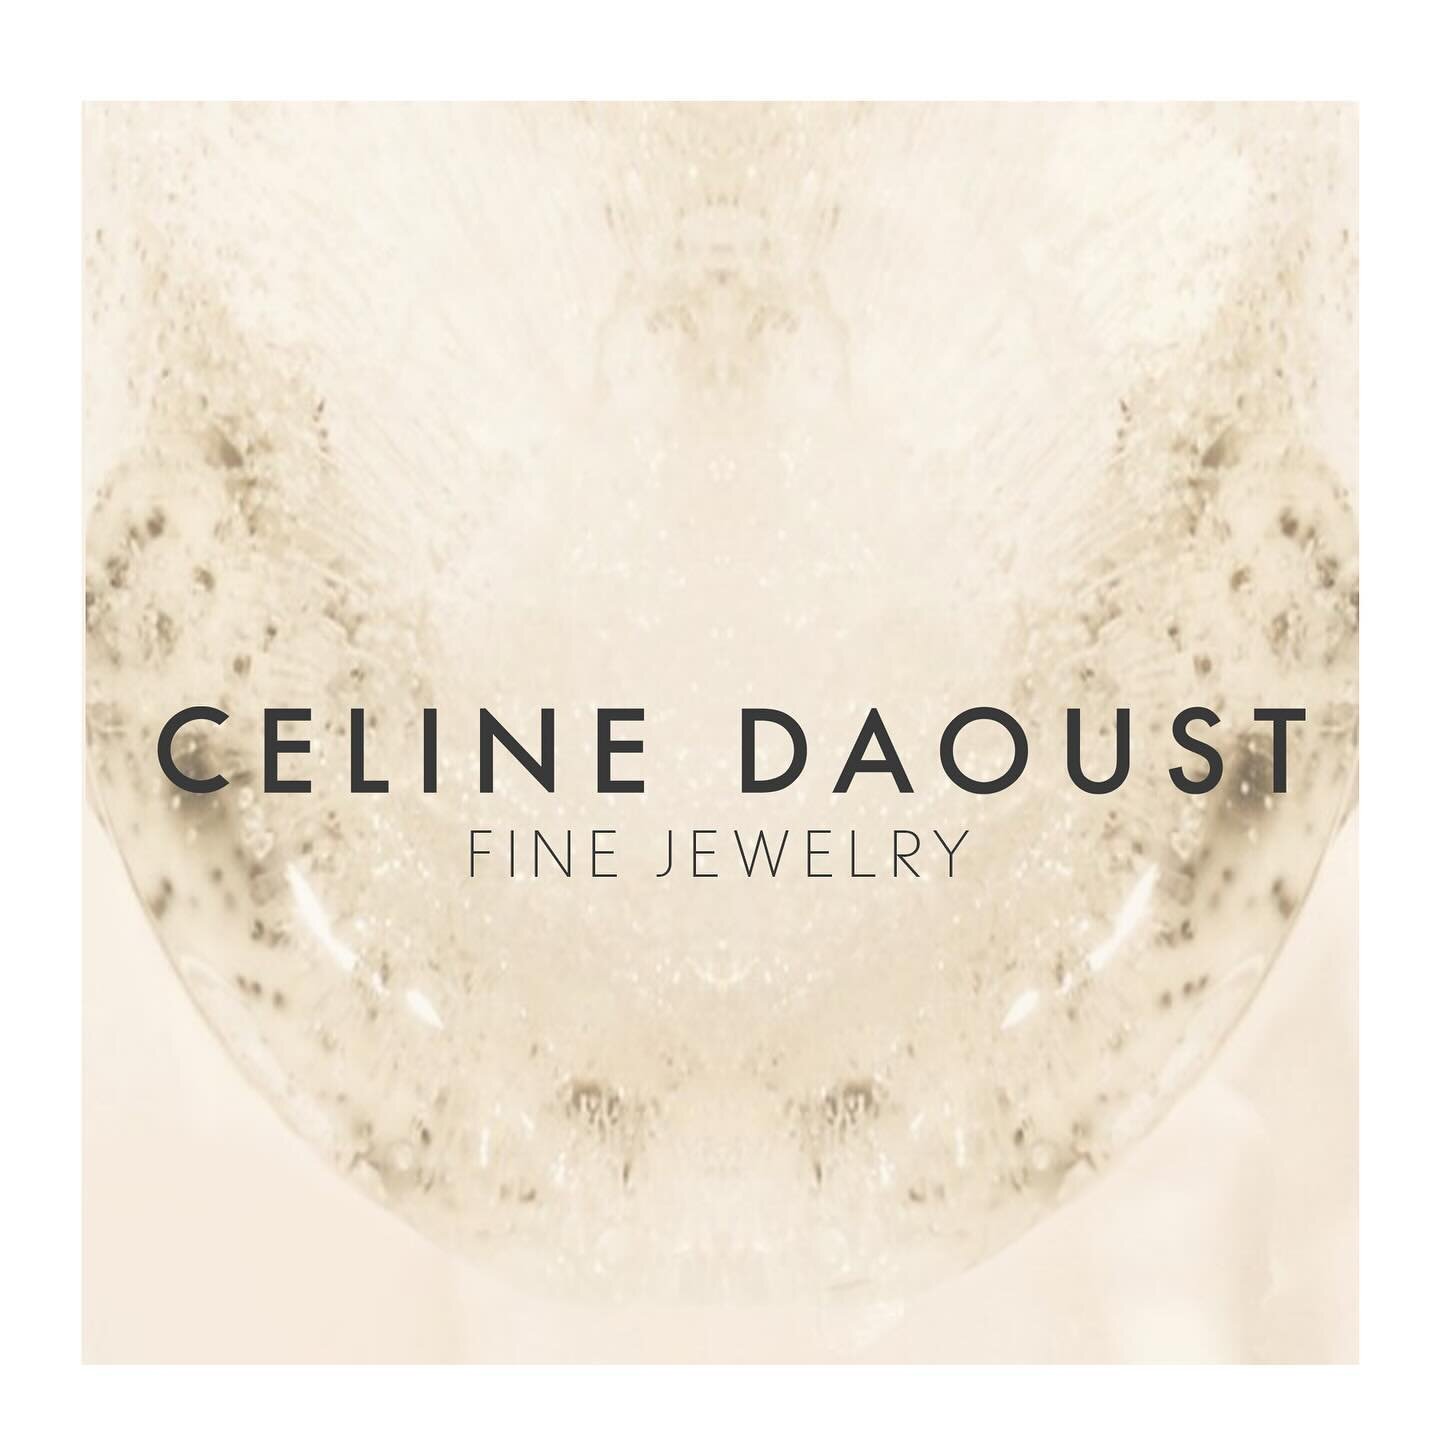 Created in Brussels, Paris, and Jaipur, Celine Daoust jewelry is inspired by nature, imbued with spirituality, and made with meticulously chosen ethically sourced gemstones. Her exceptional designs are crafted in 14-karat gold, for a lifetime of joy 